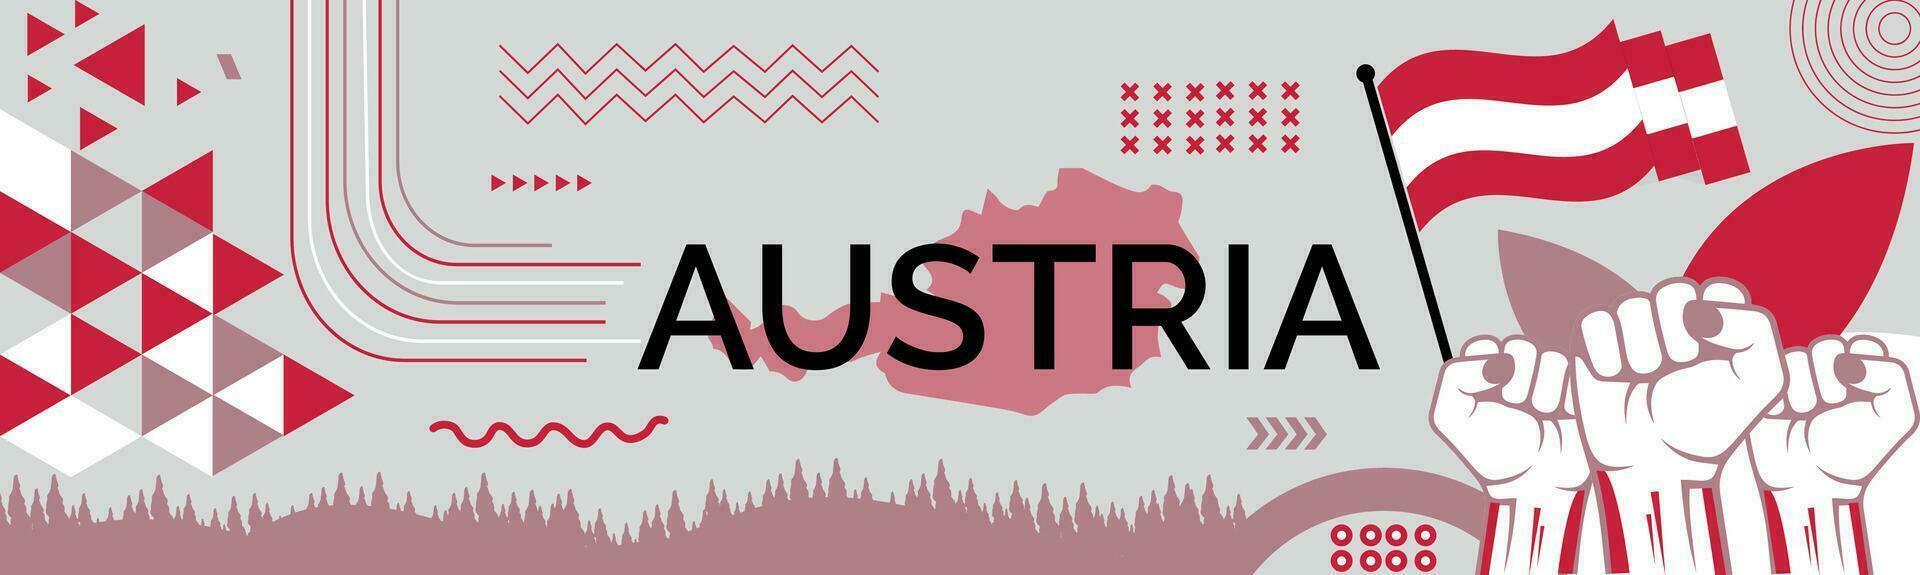 Austria national day banner with map, flag colors theme background and geometric abstract retro modern colorfull design with raised hands or fists. vector